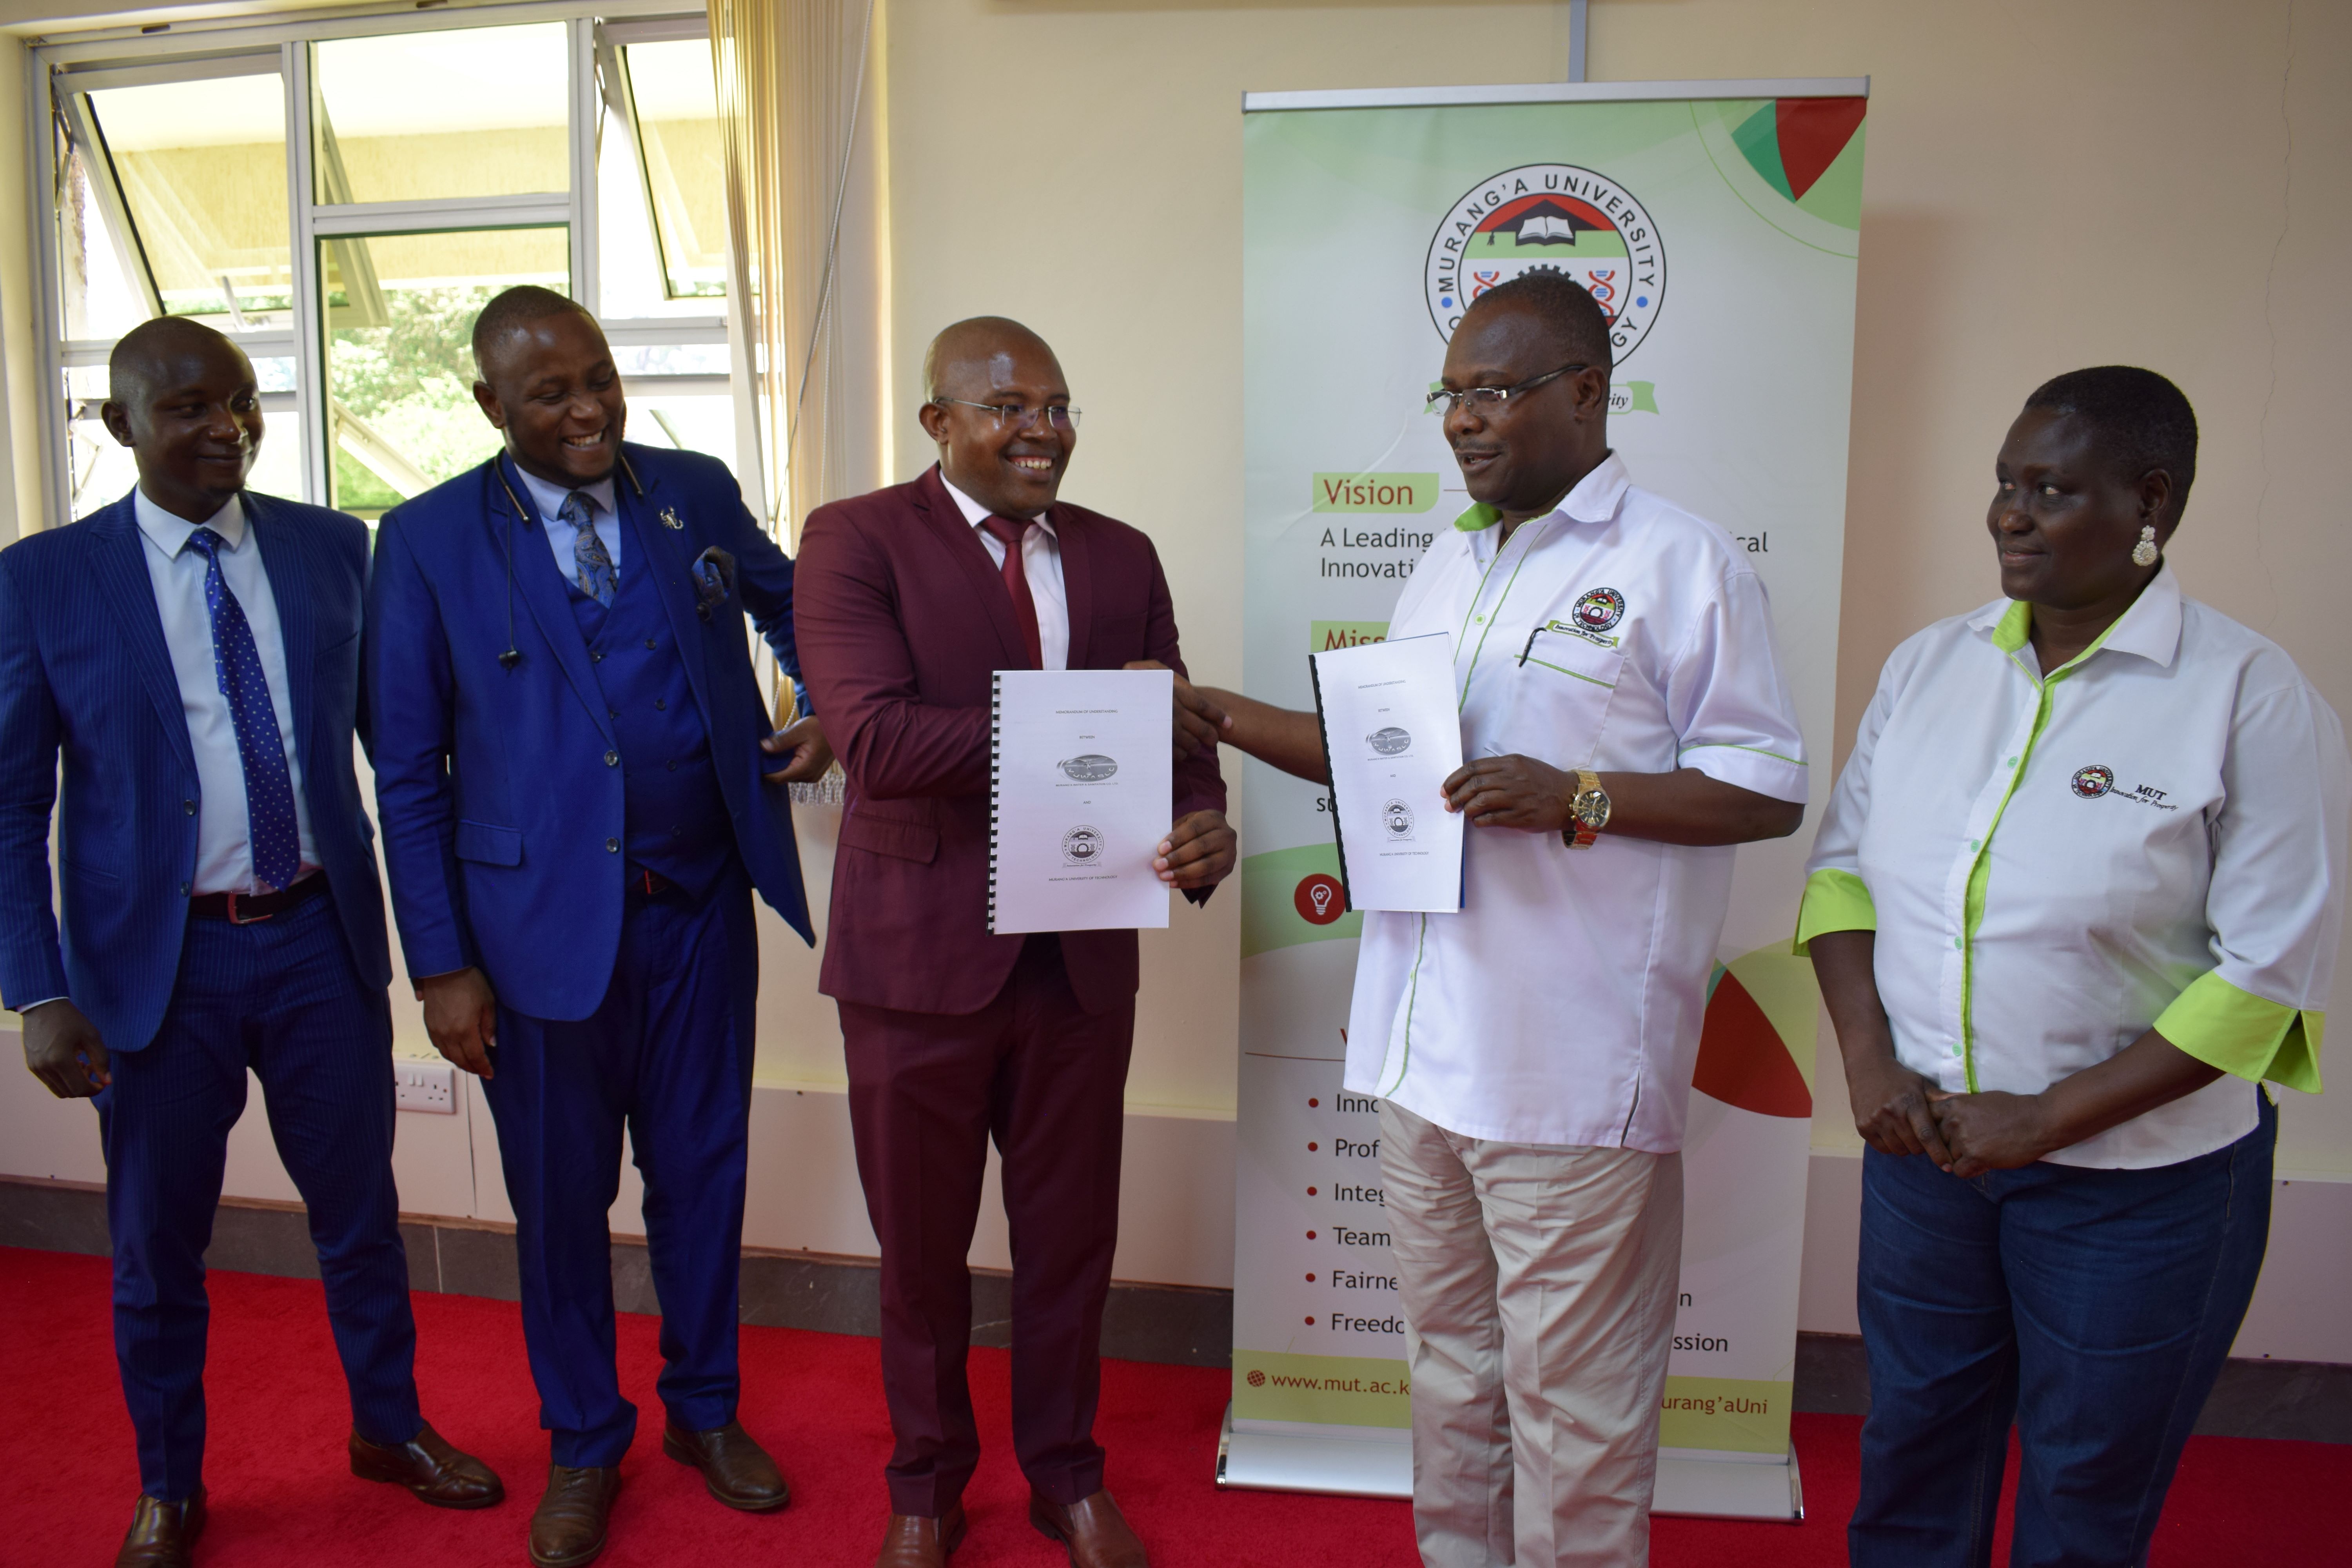 Contract signing between MUWASCO and Murang'a University